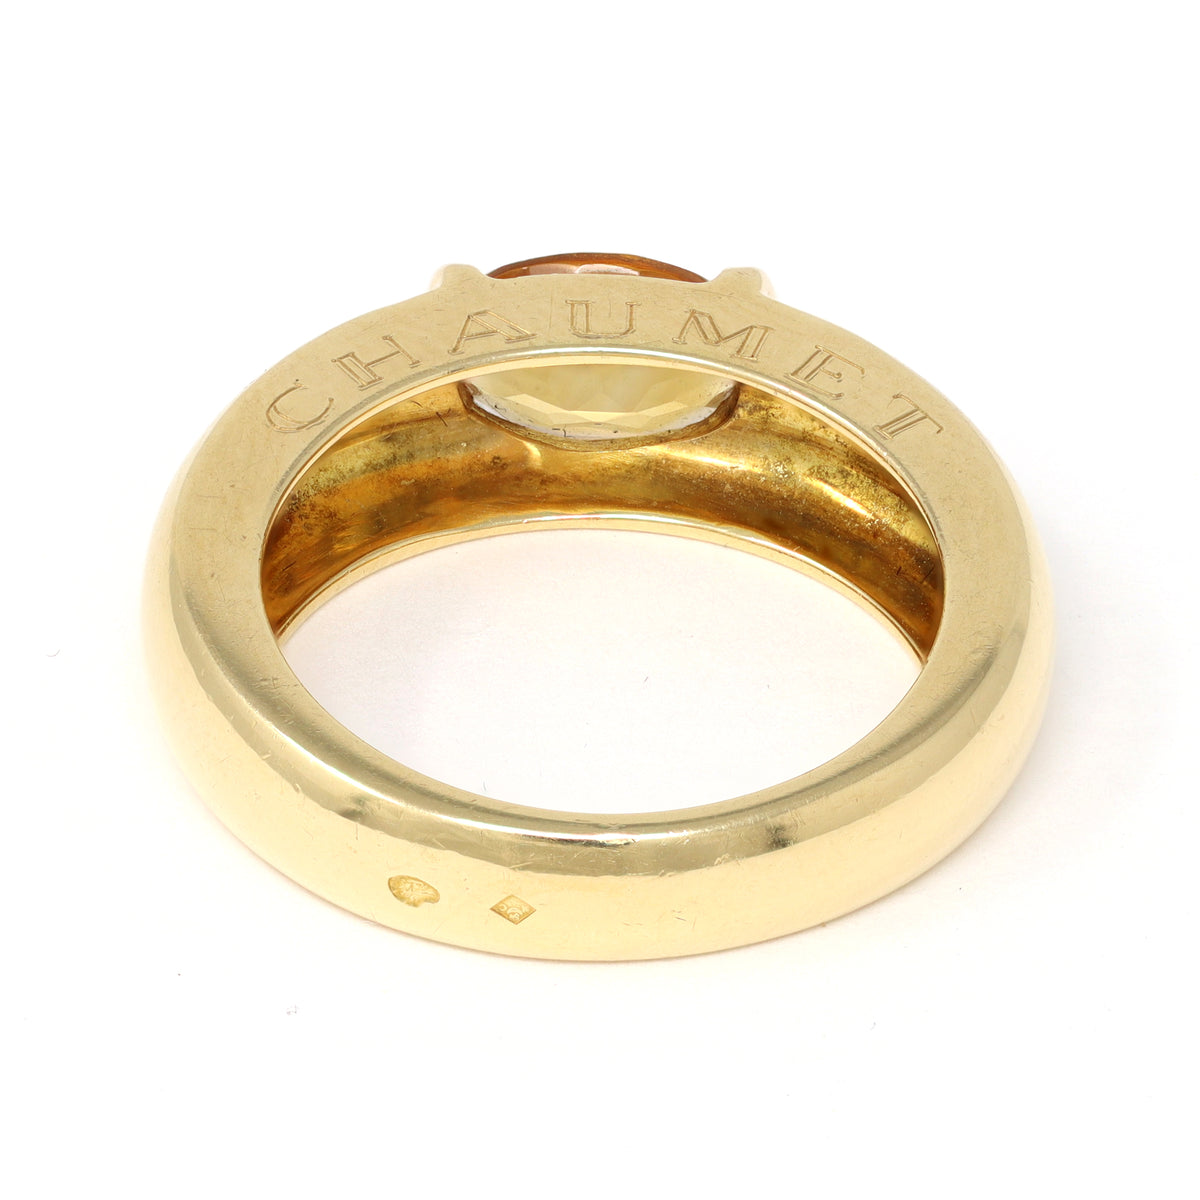 Signed Chaumet Paris Citrine Ring in 18k back view